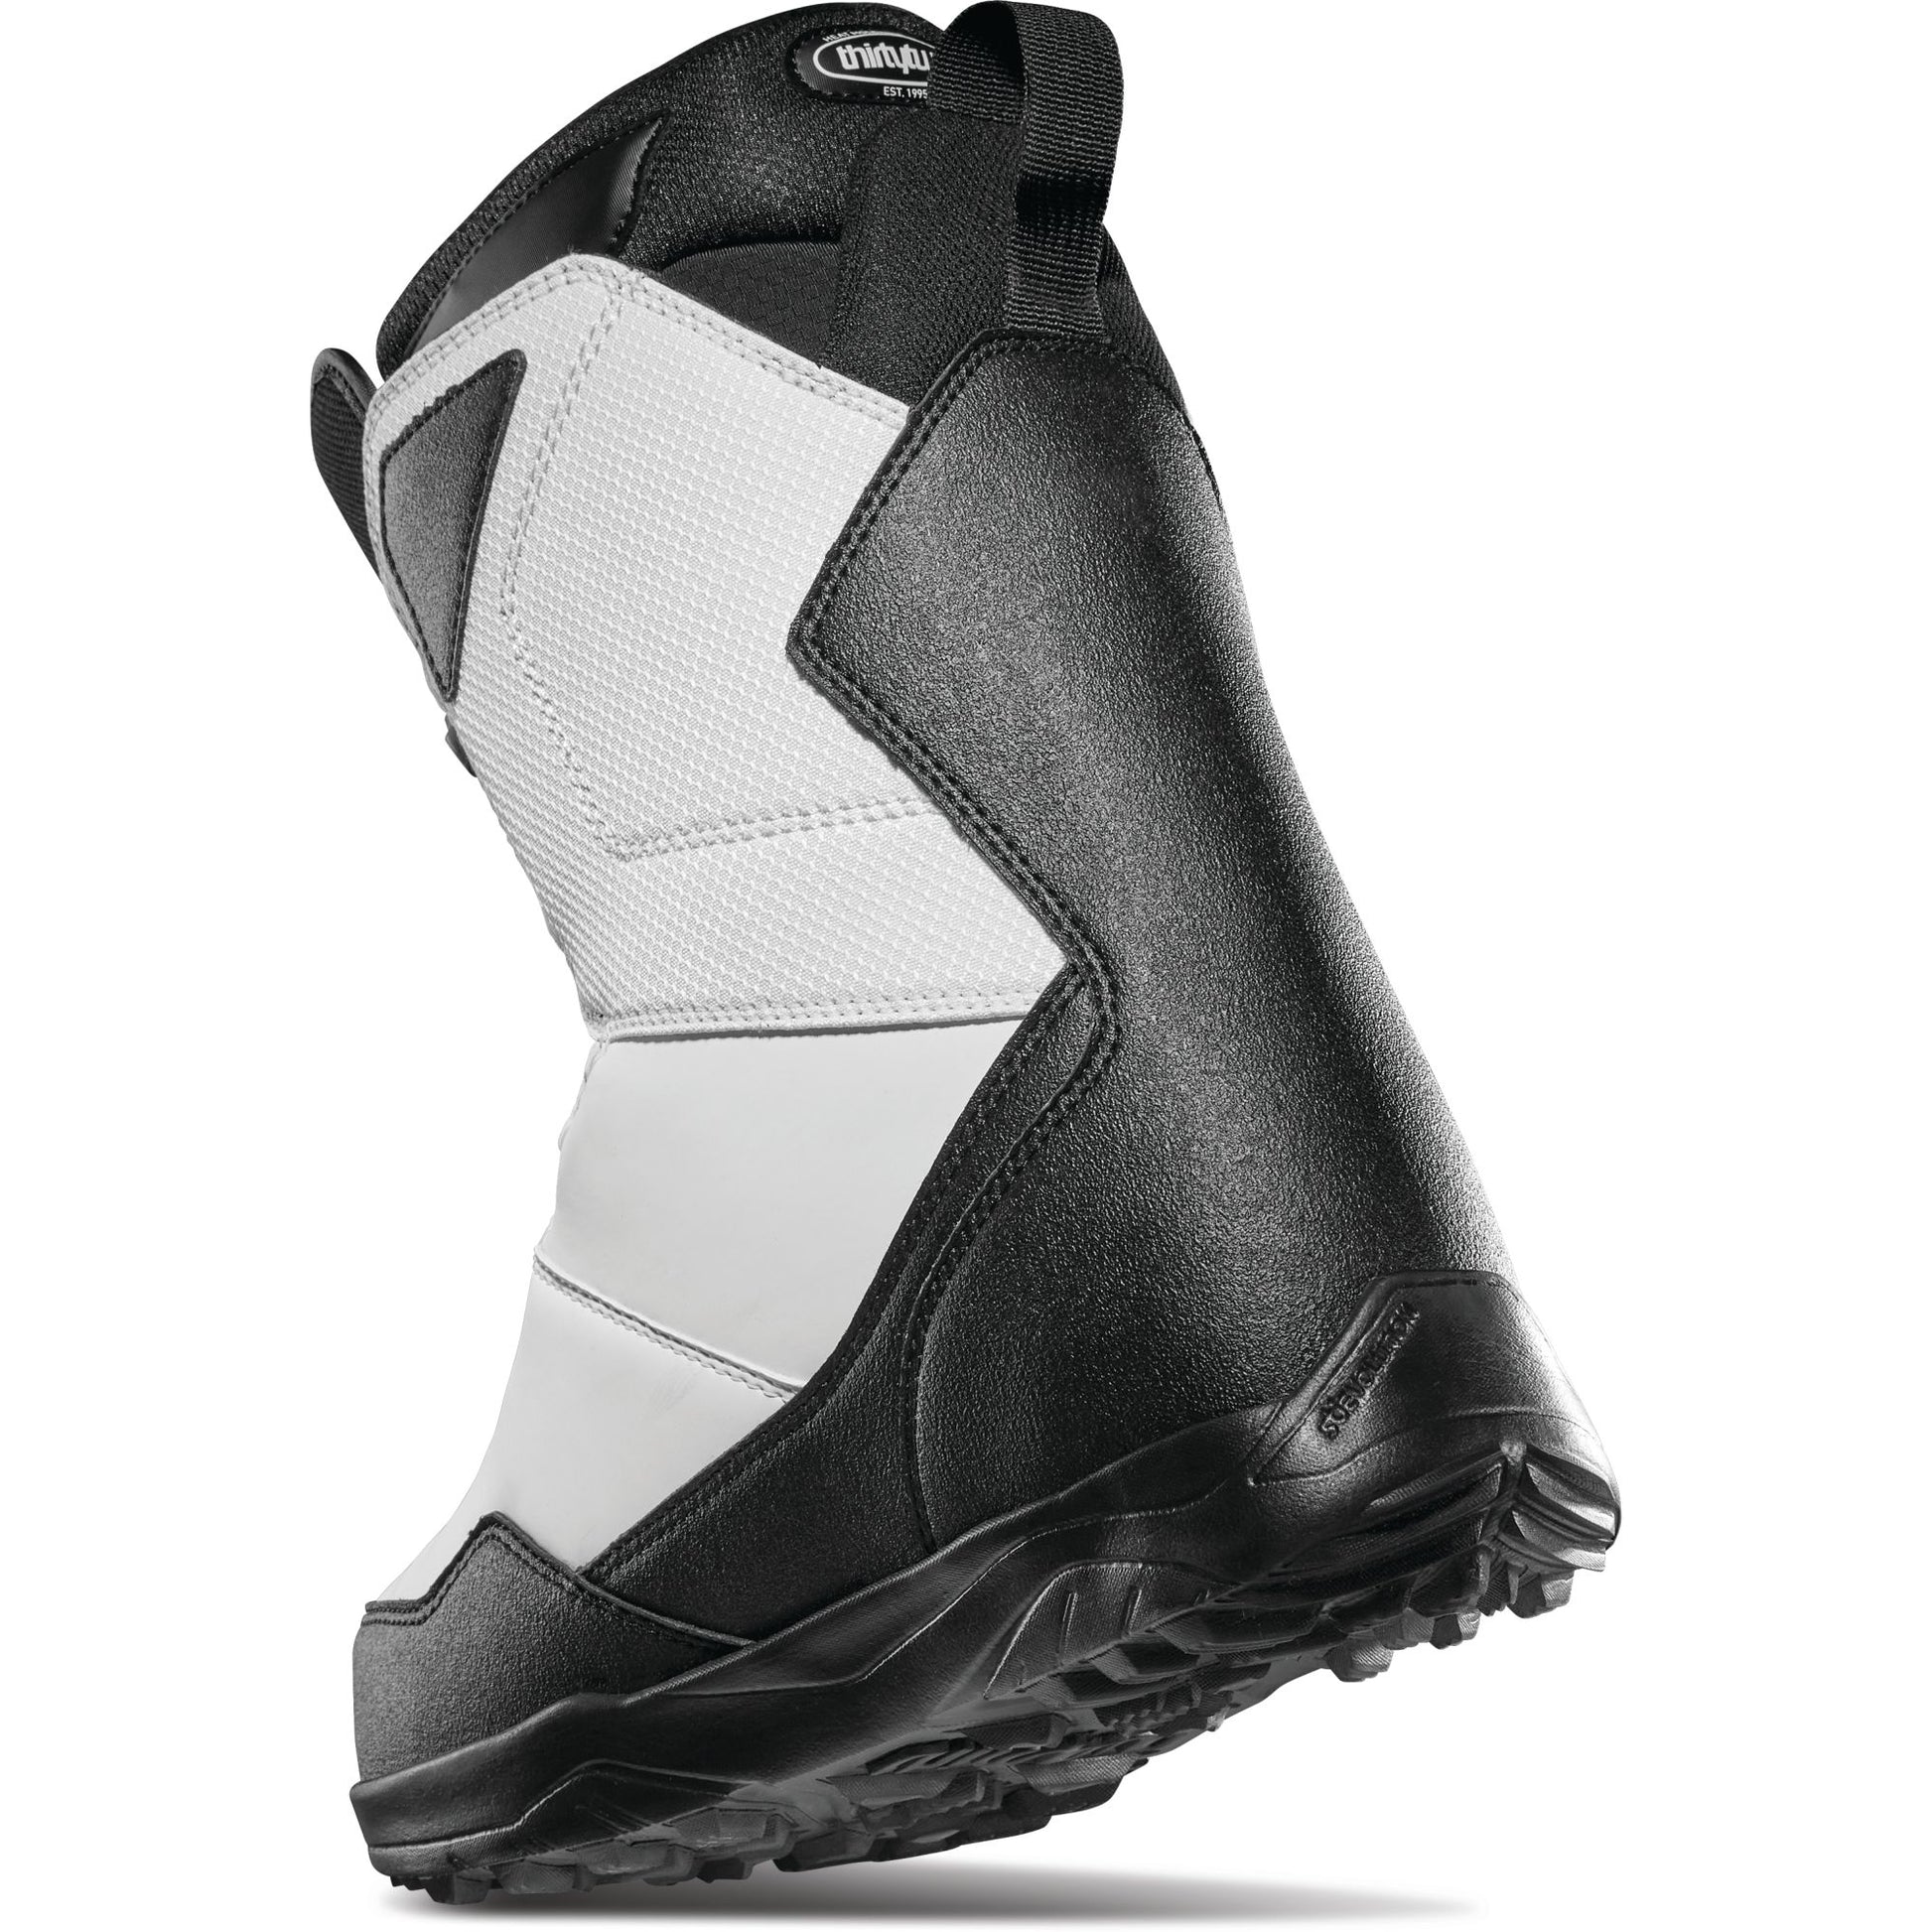 ThirtyTwo Shifty BOA Snowboard Boots Black White Snowboard Boots